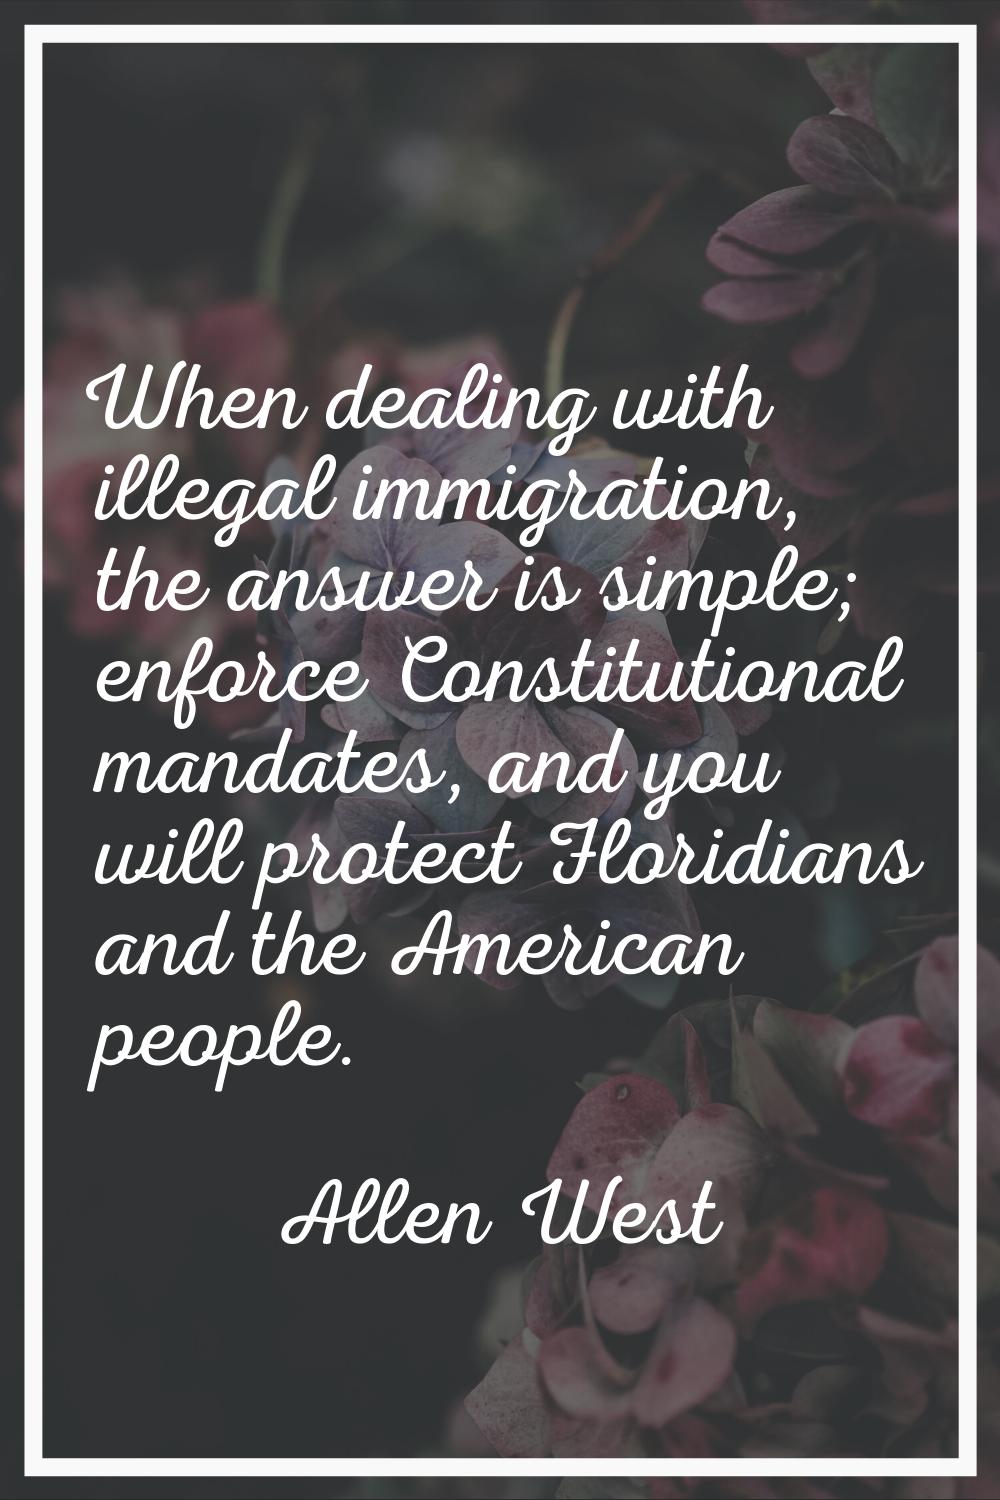 When dealing with illegal immigration, the answer is simple; enforce Constitutional mandates, and y